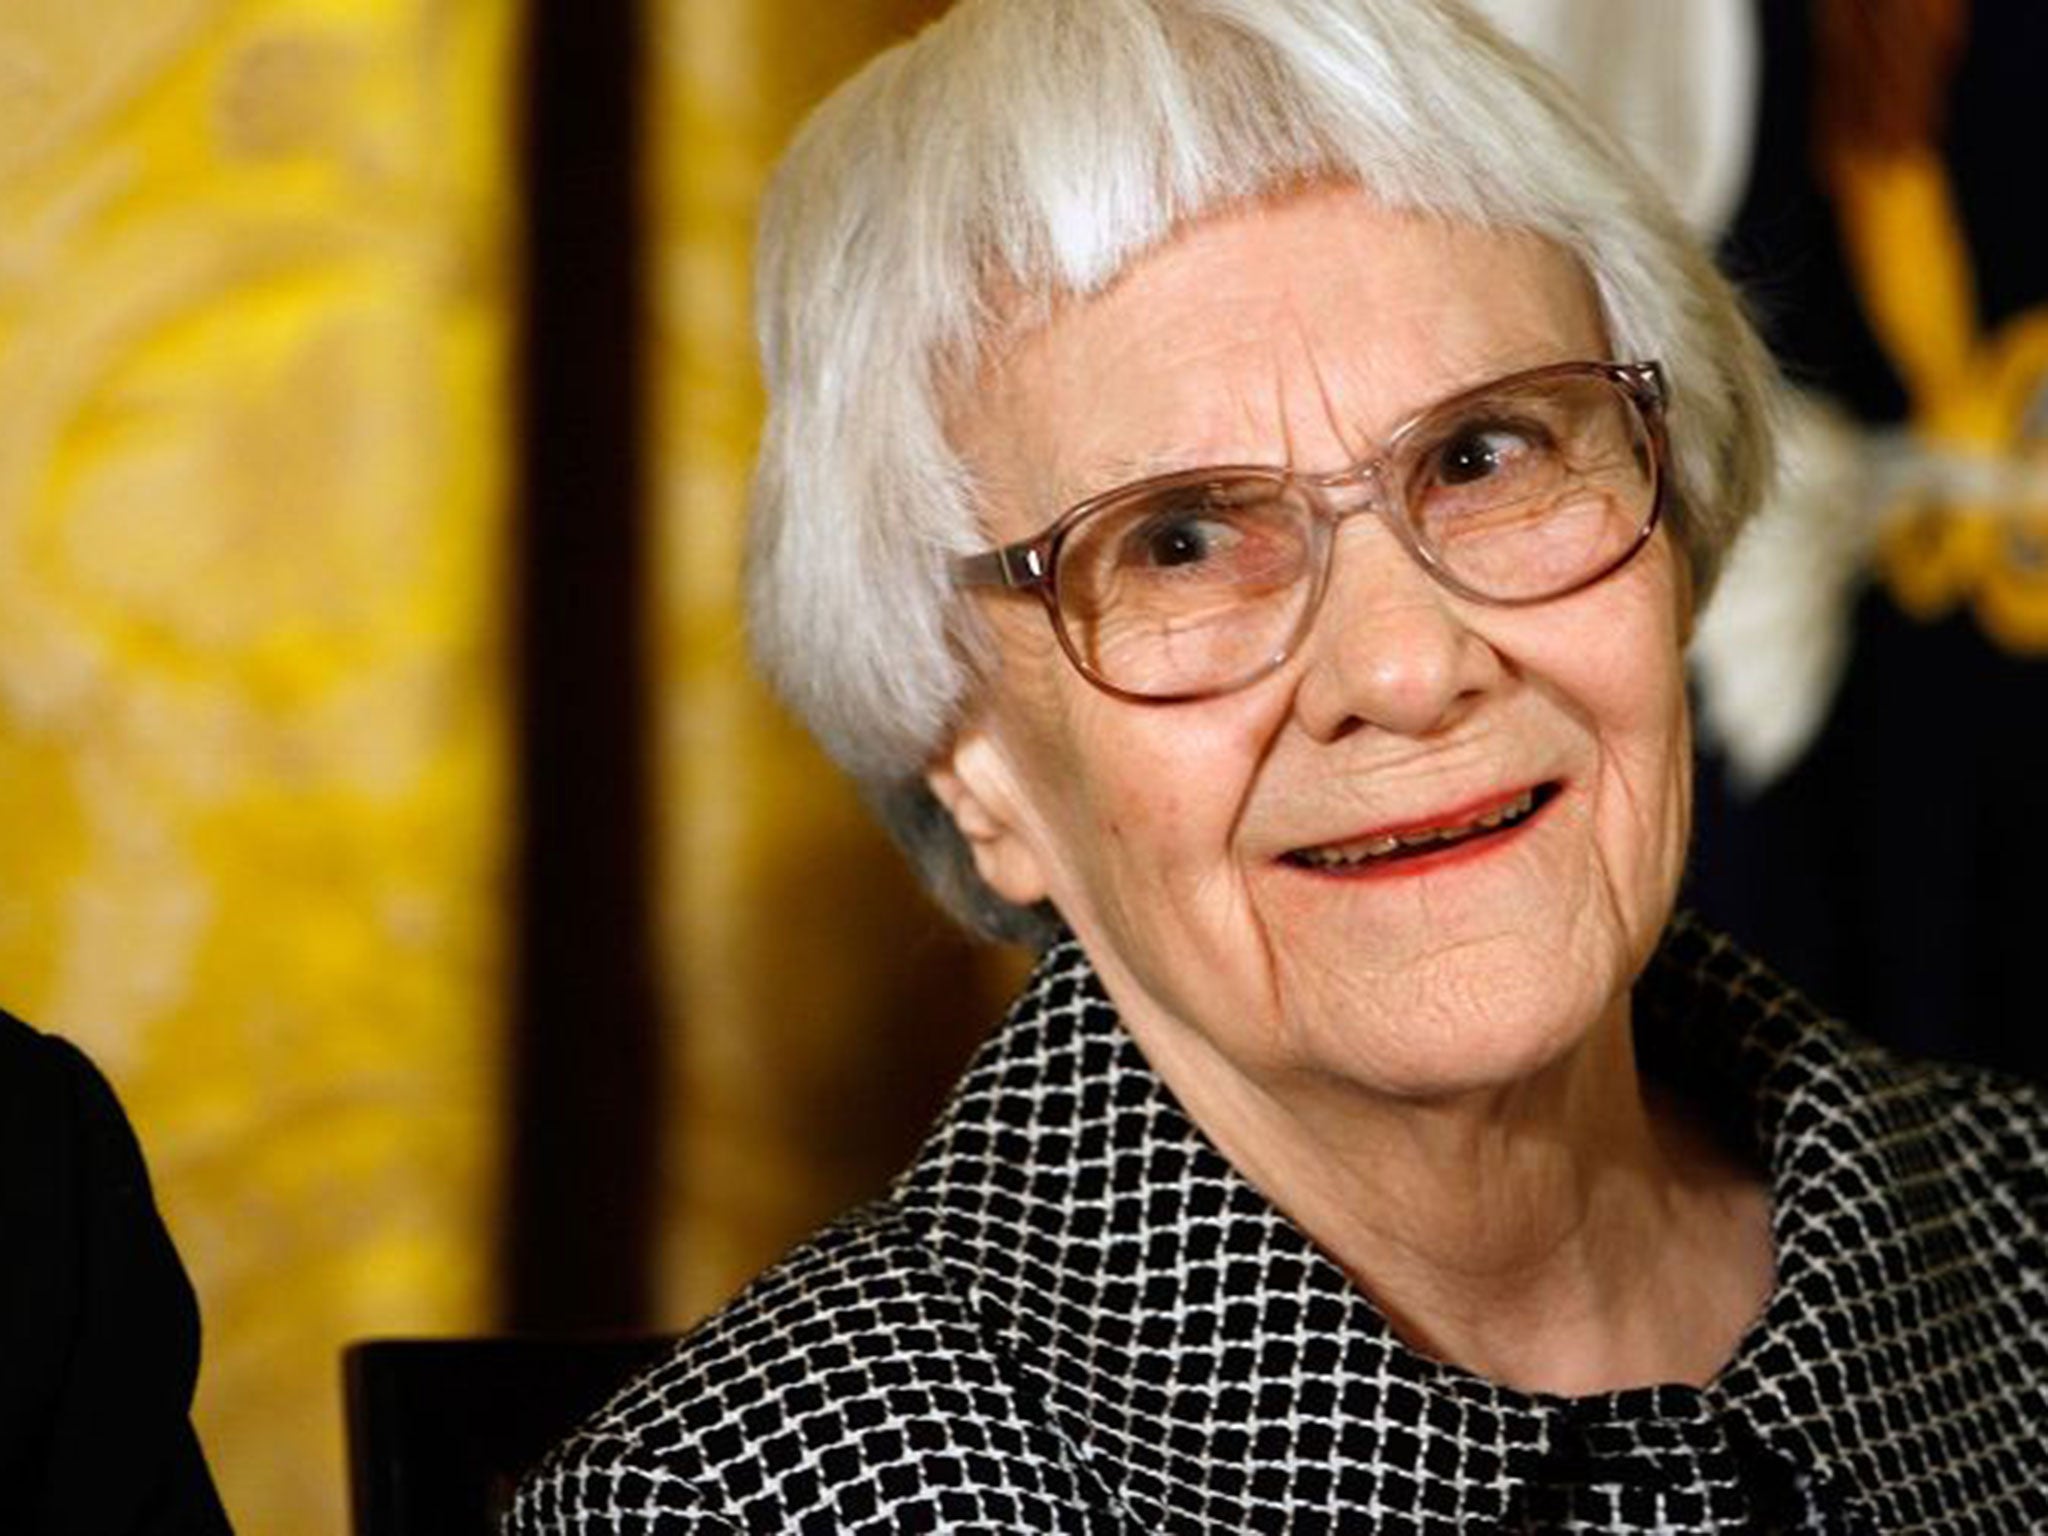 Pulitzer Prize winner and "To Kill A Mockingbird" author Harper Lee smiles before receiving the 2007 Presidential Medal of Freedom